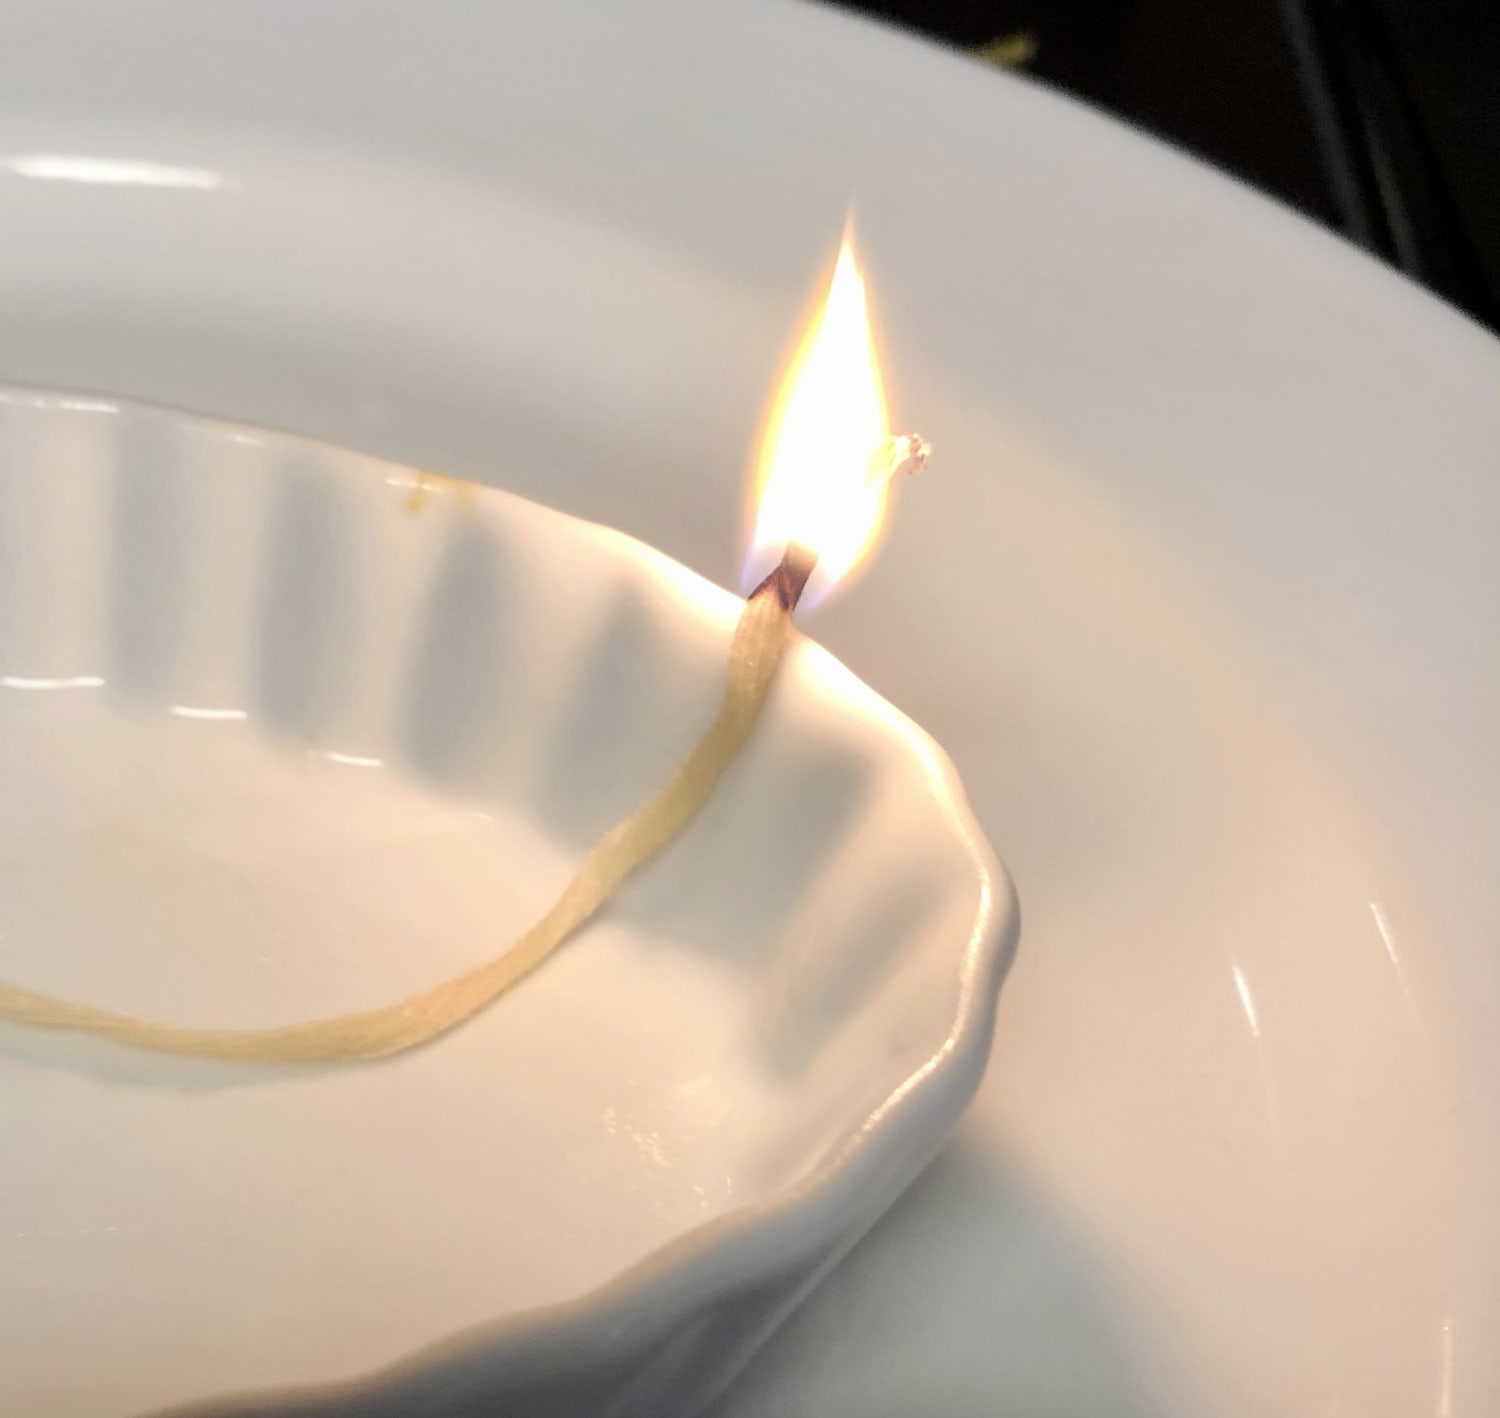 Have you heard of the Butter Candle? : r/StupidFood